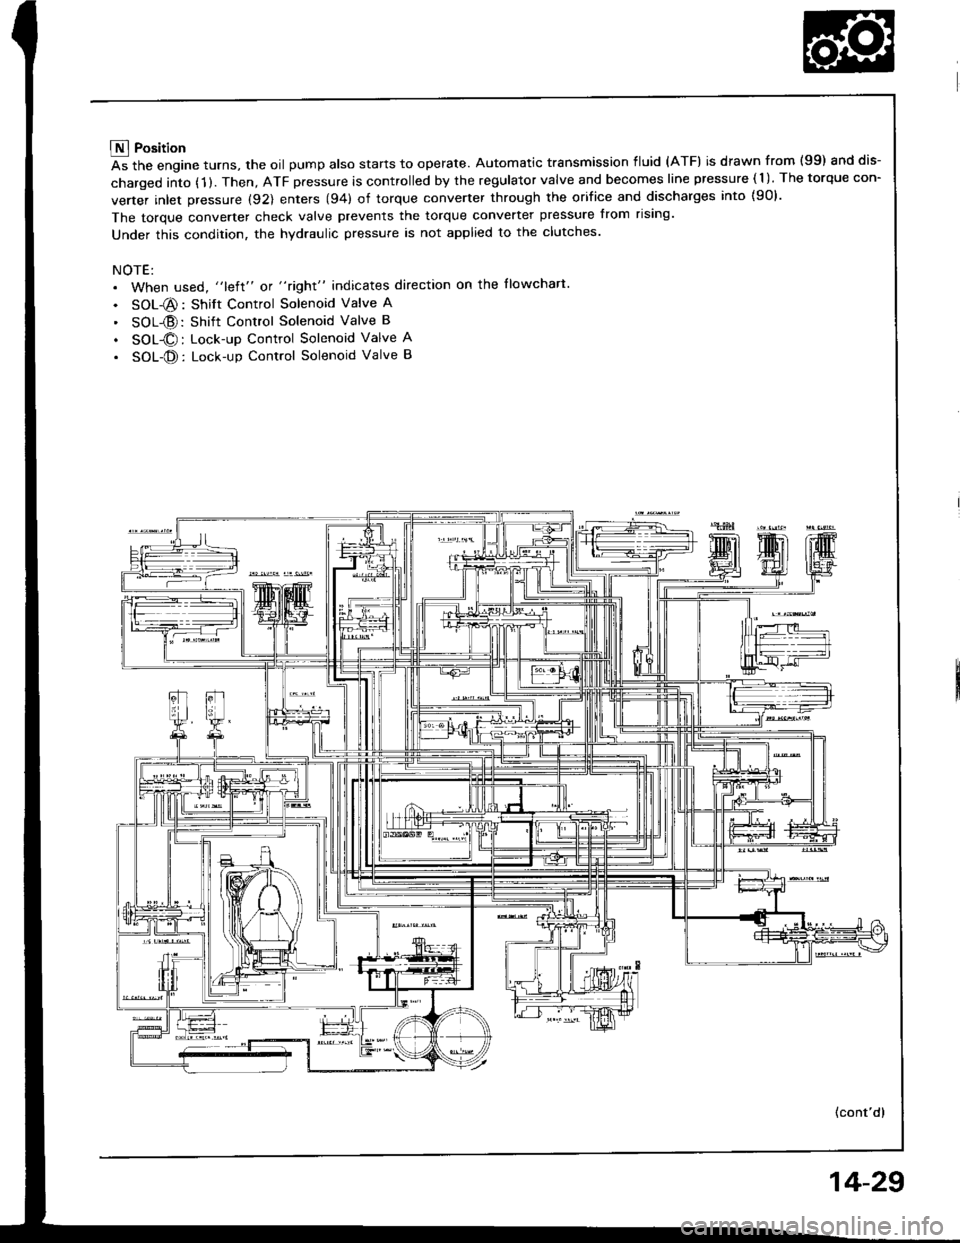 HONDA INTEGRA 1994 4.G Workshop Manual E Position
As the engine turns, the oil pump also starts to operate. Automatic transmission fluid (ATF) is drawn from (99) and dis-
charged into (1 ). Then, ATF pressure is controlled by the regulator